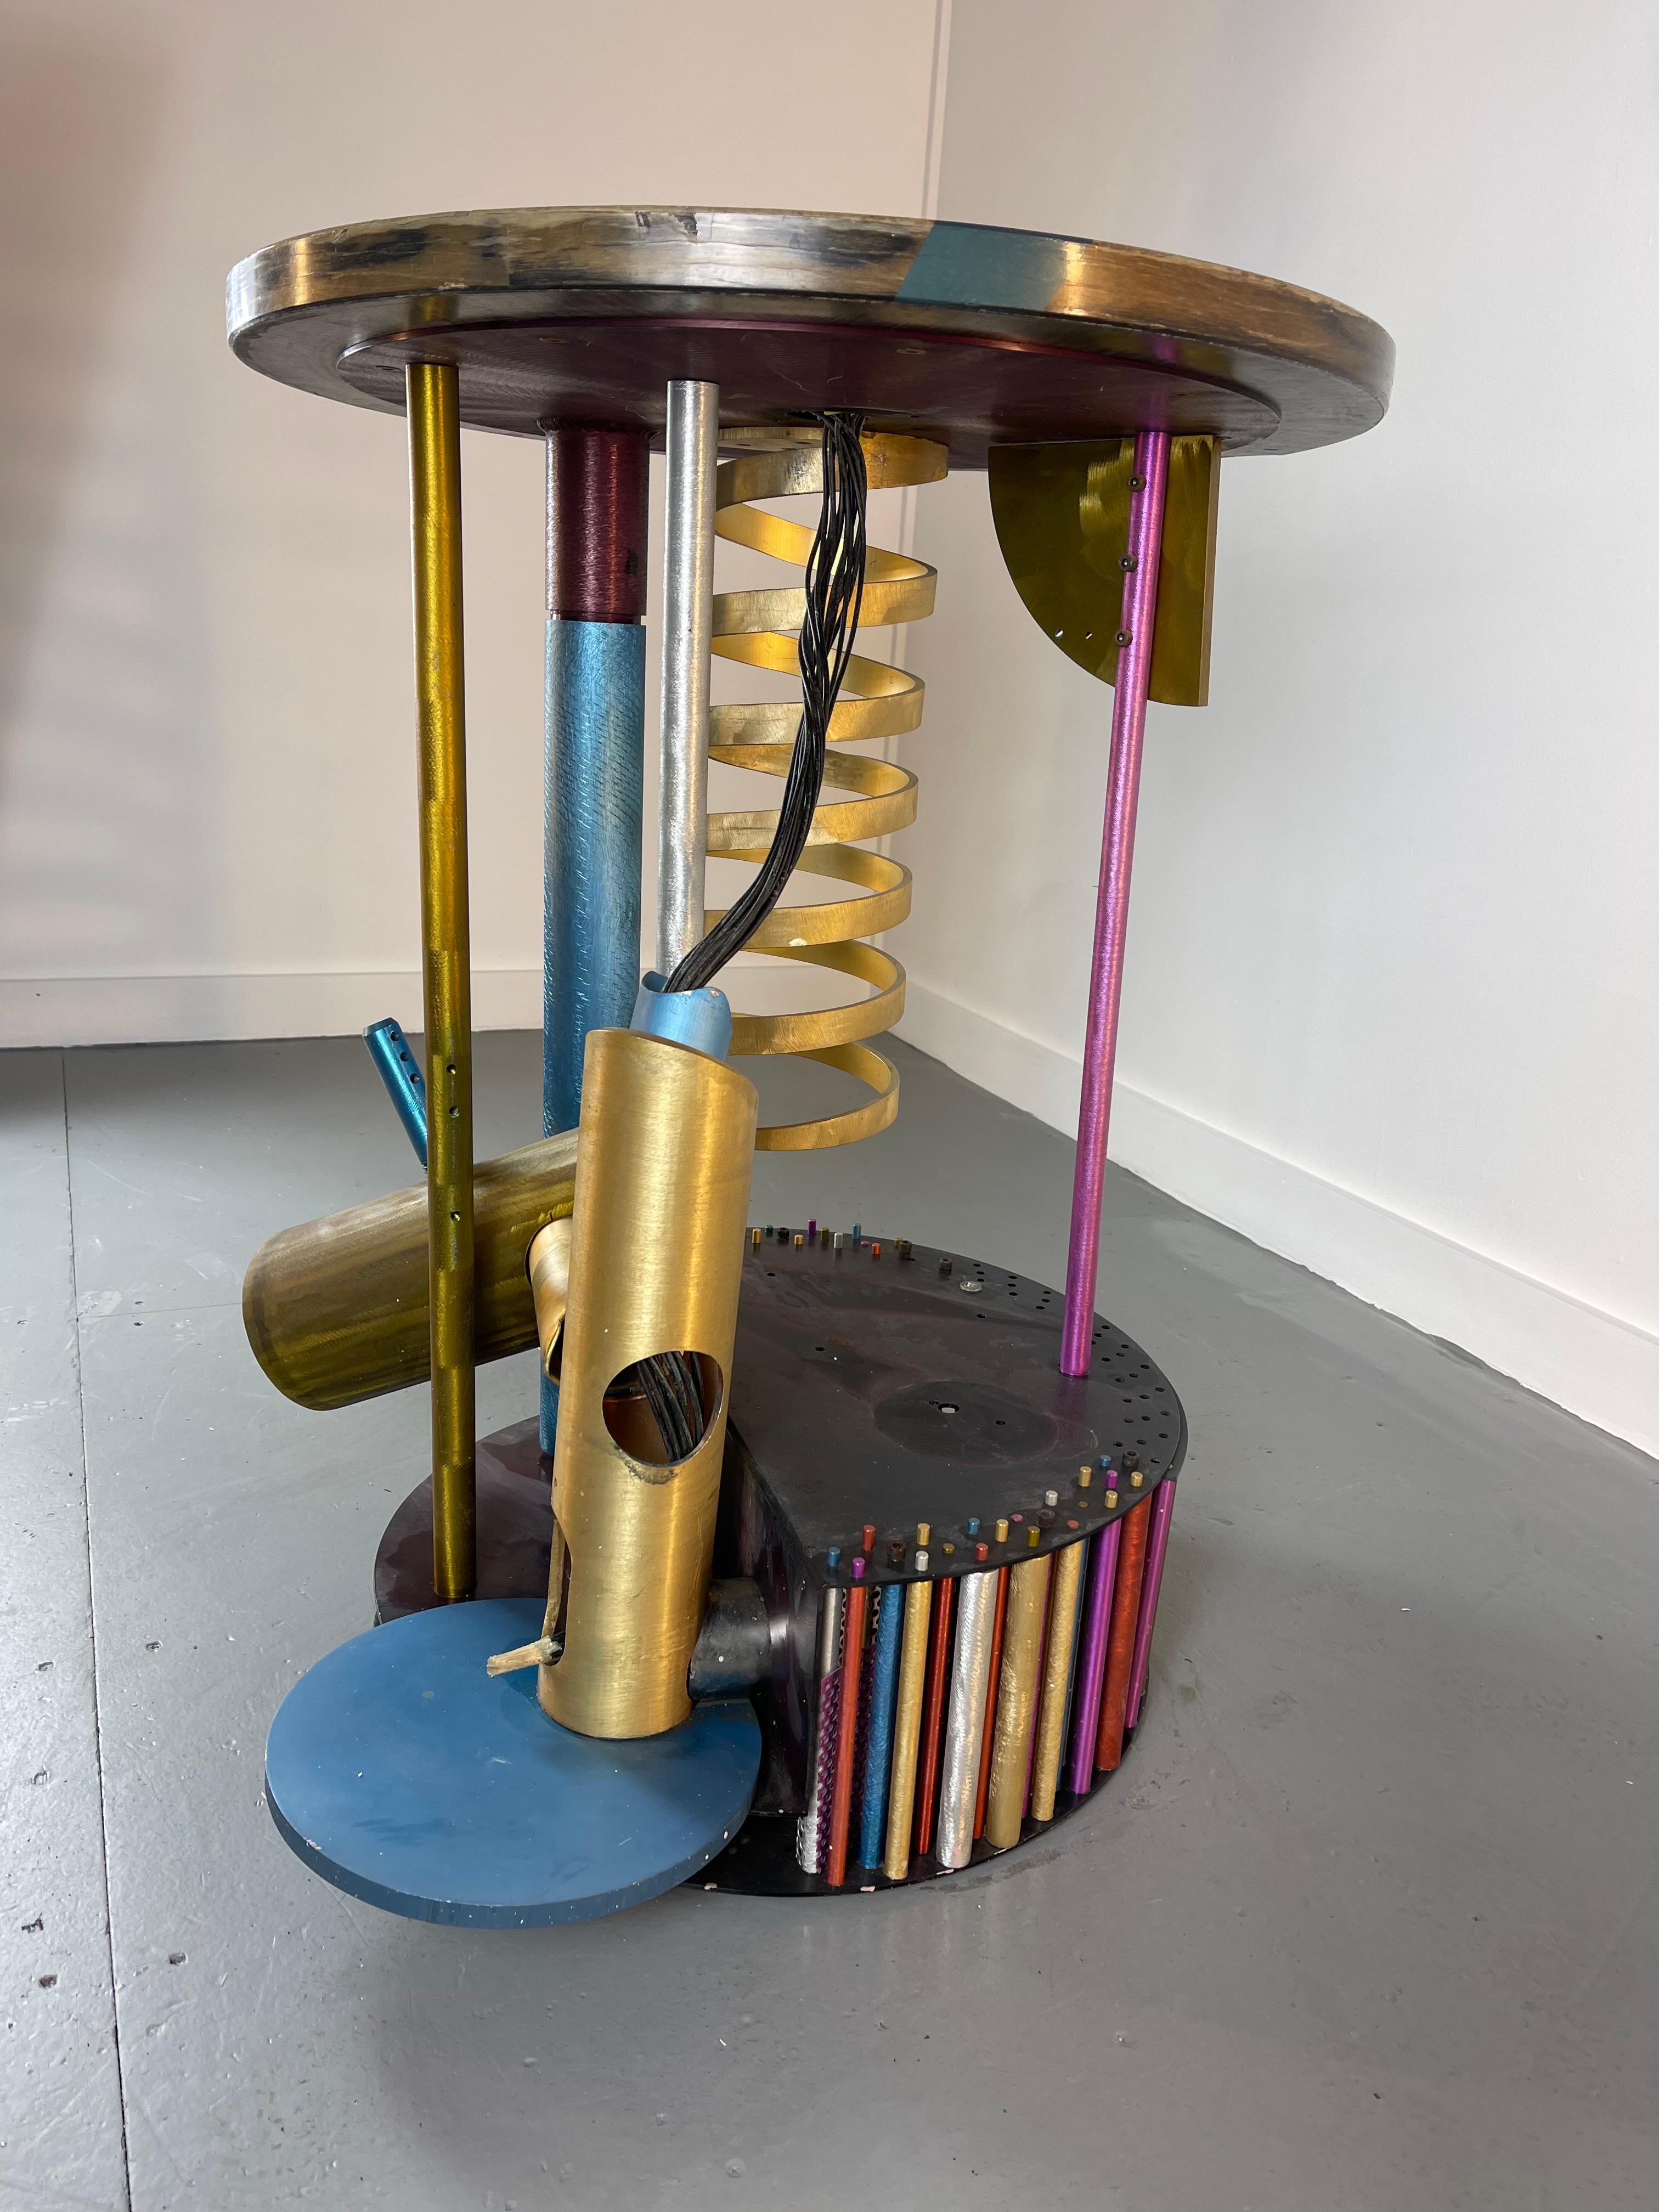 Hand-Crafted Memphis Style Industrial Table / Sculpture, by Jay Stanger, , Aluminum, Wood, Fiber For Sale